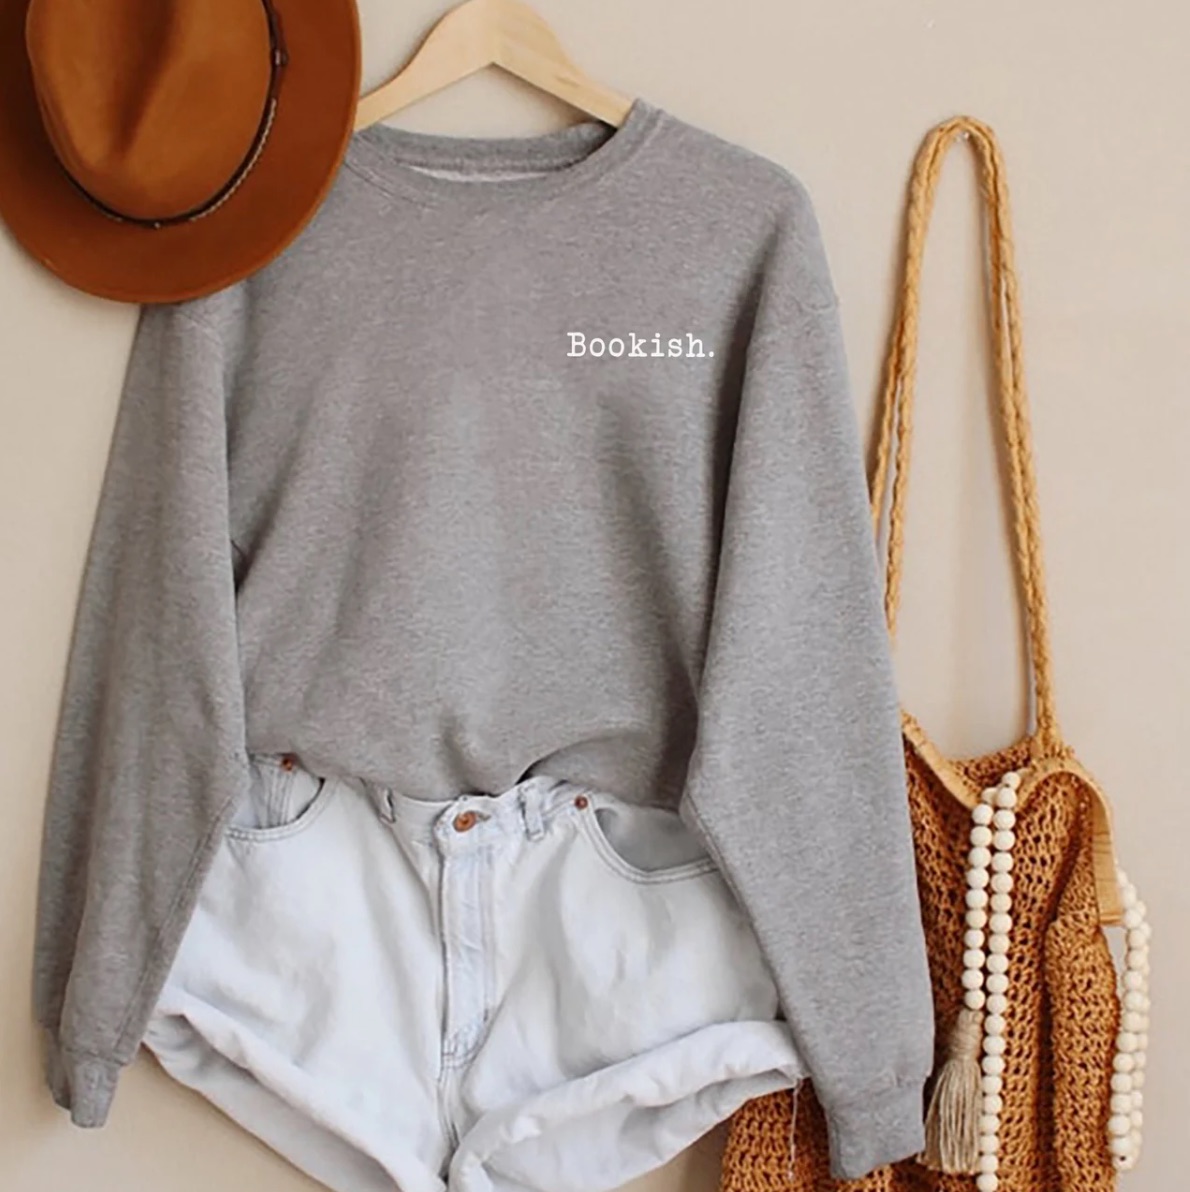 gray sweatshirt with the word "bookish" in white text.